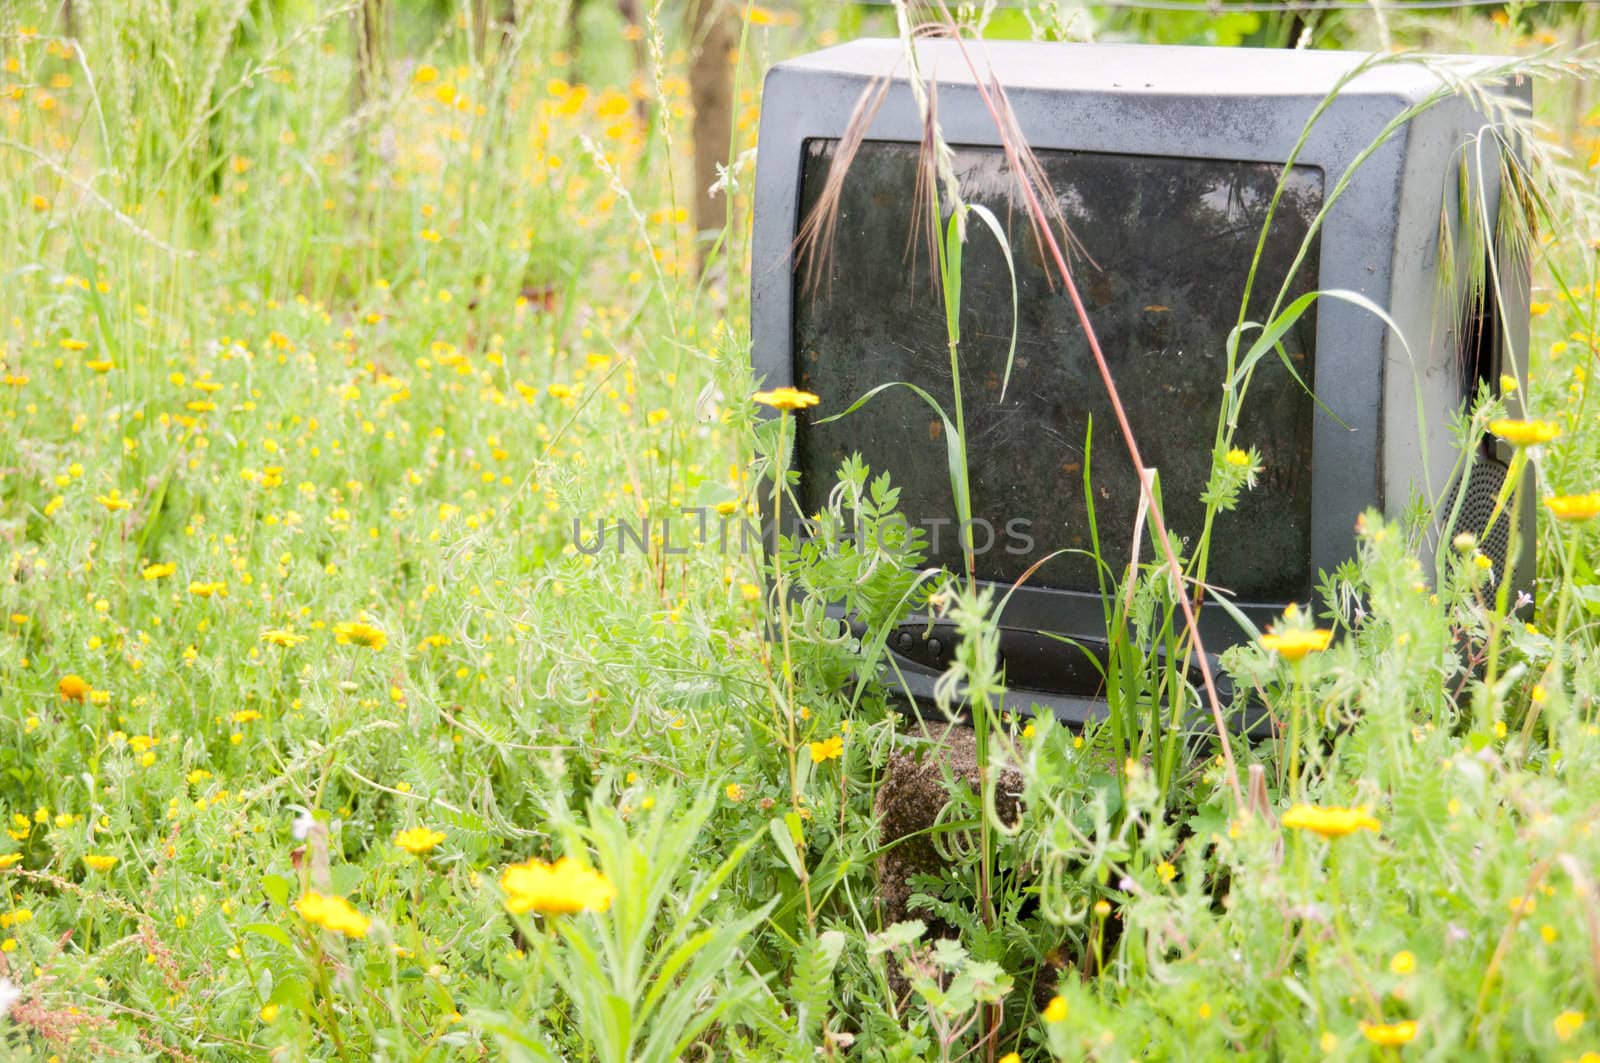 discarded old television on nature with some yellow daisies around